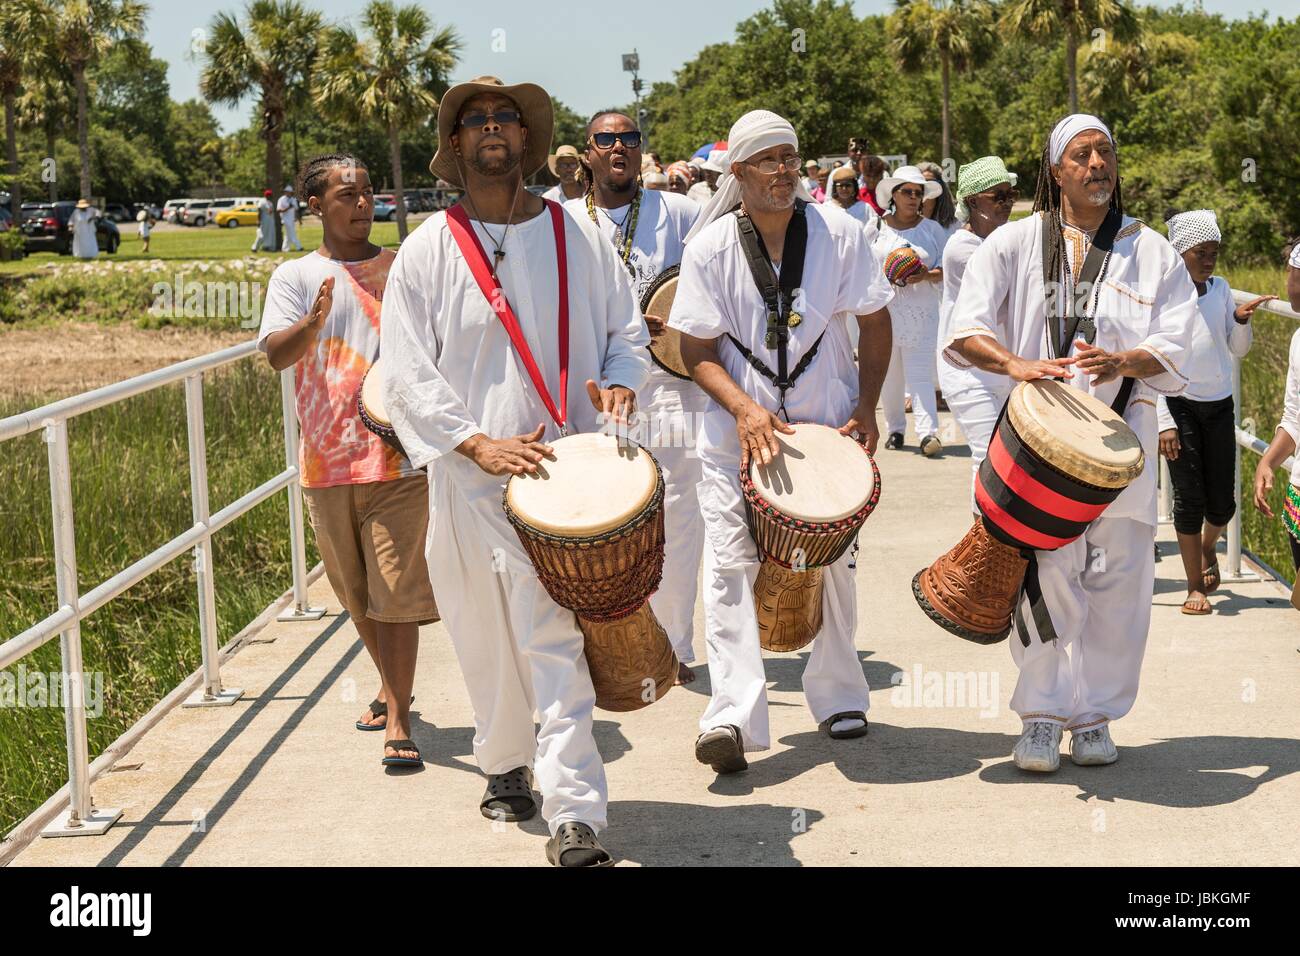 Descendants of enslaved Africans brought to Charleston in the Middle Passage hold a procession to honor their relatives lost during a remembrance ceremony at Fort Moultie National Monument June 10, 2017 in Sullivan's Island, South Carolina. The Middle Passage refers to the triangular trade in which millions of Africans were shipped to the New World as part of the Atlantic slave trade. An estimated 15% of the Africans died at sea and considerably more in the process of capturing and transporting. The total number of African deaths directly attributable to the Middle Passage voyage is estimated  Stock Photo